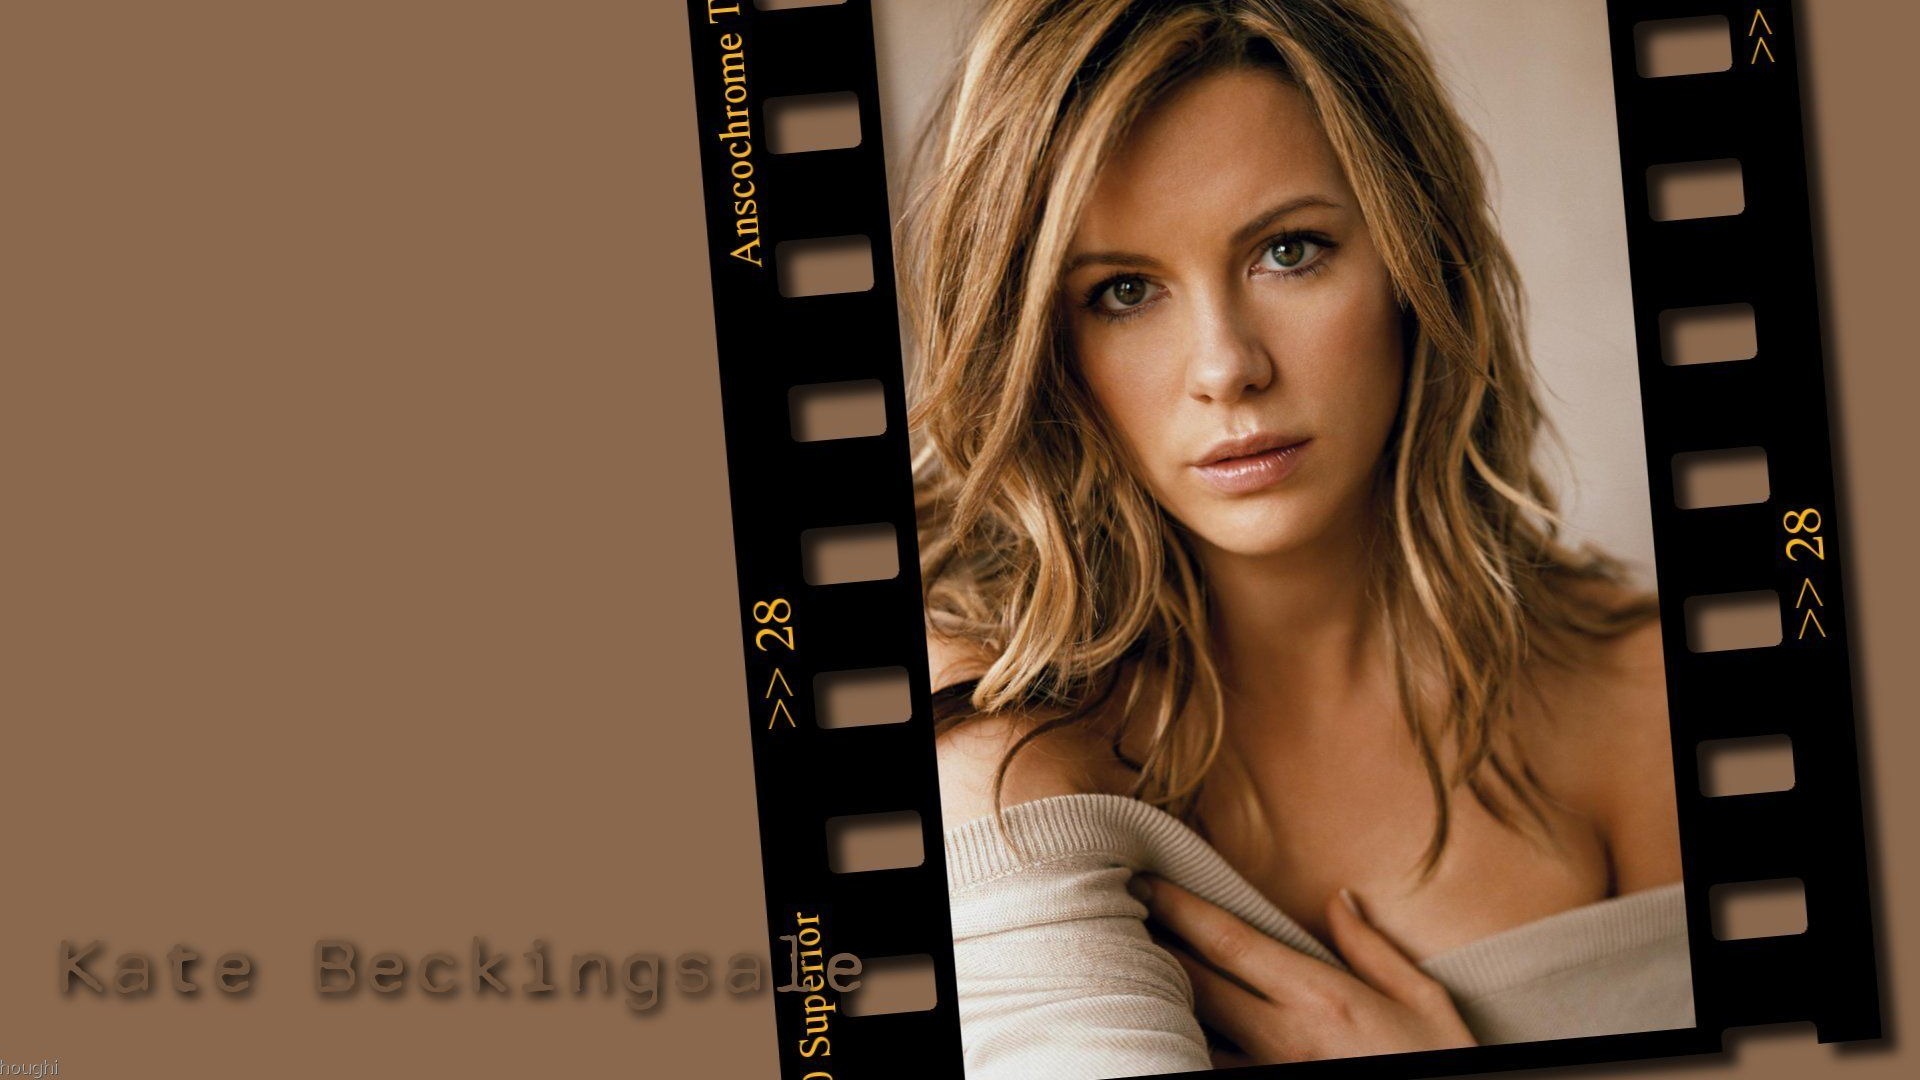 Kate Beckinsale #066 - 1920x1080 Wallpapers Pictures Photos Images